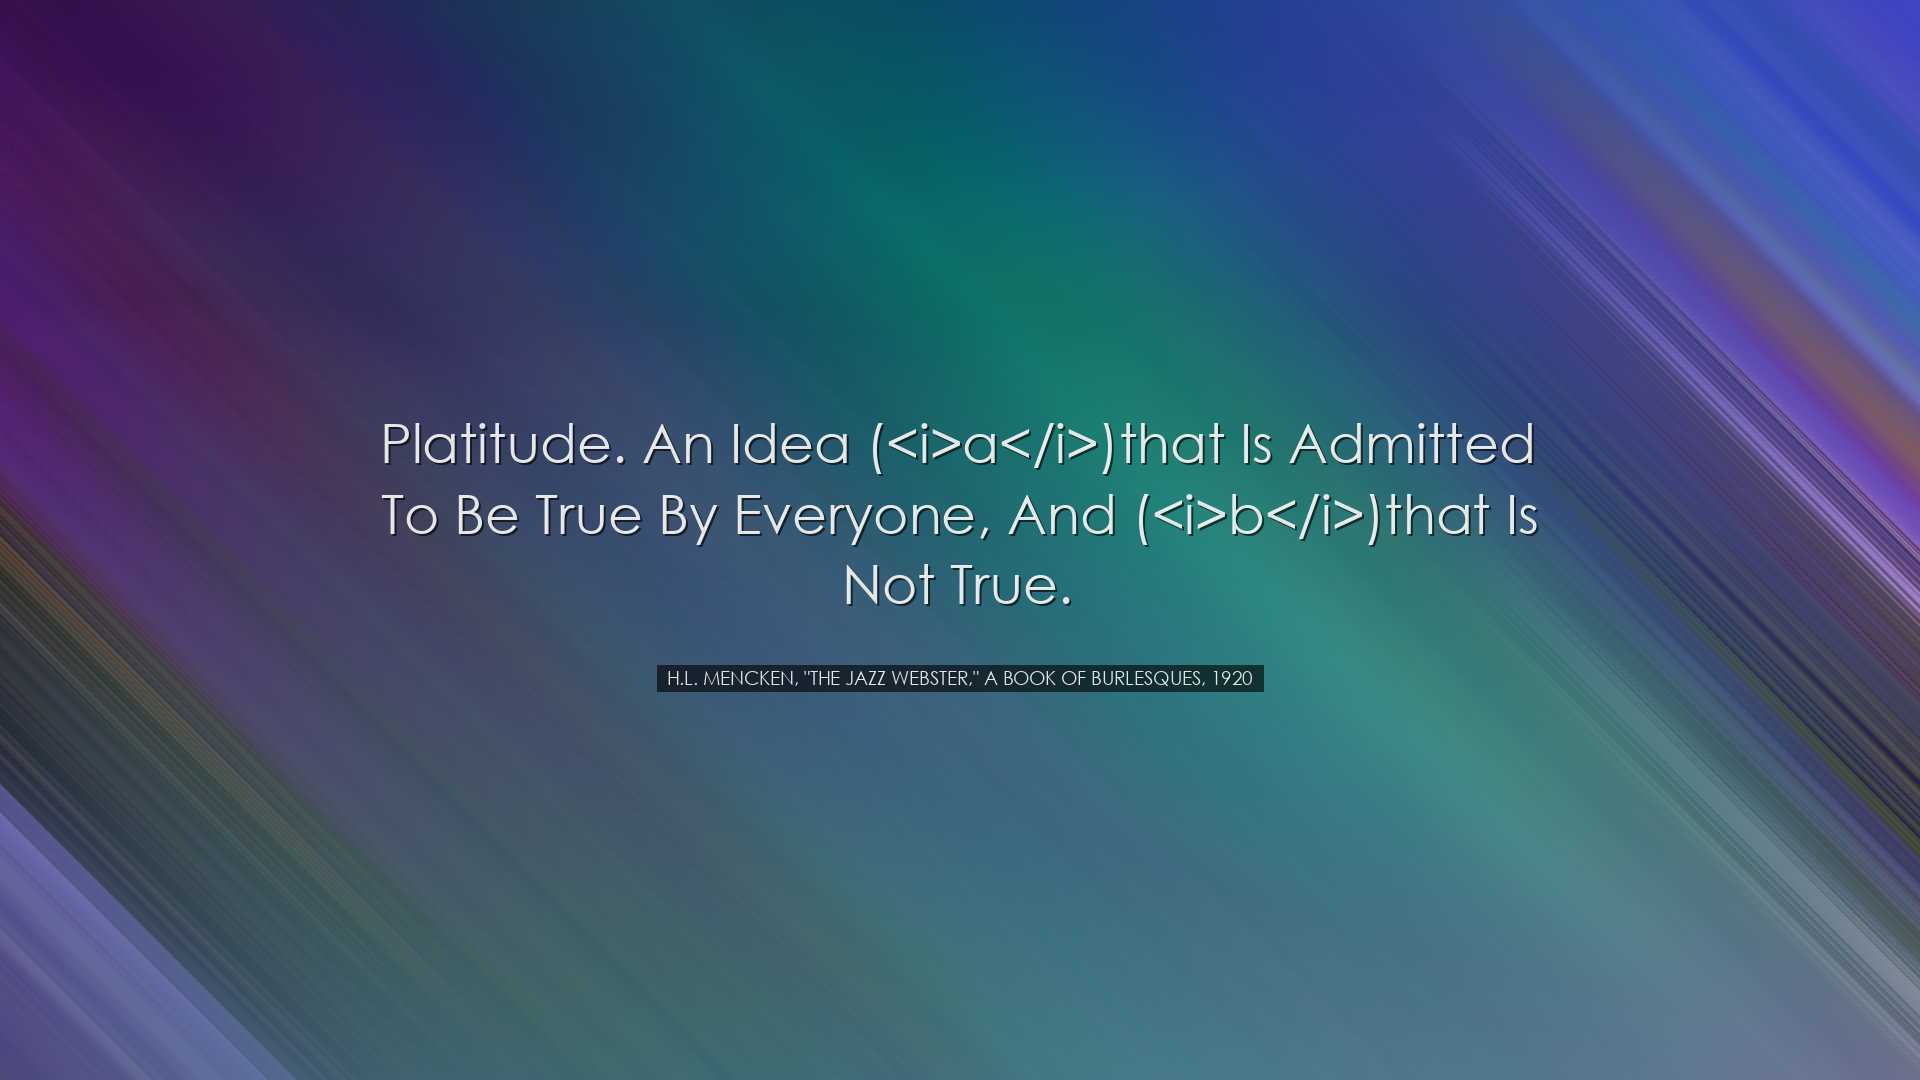 Platitude. An idea (a)that is admitted to be true by everyo